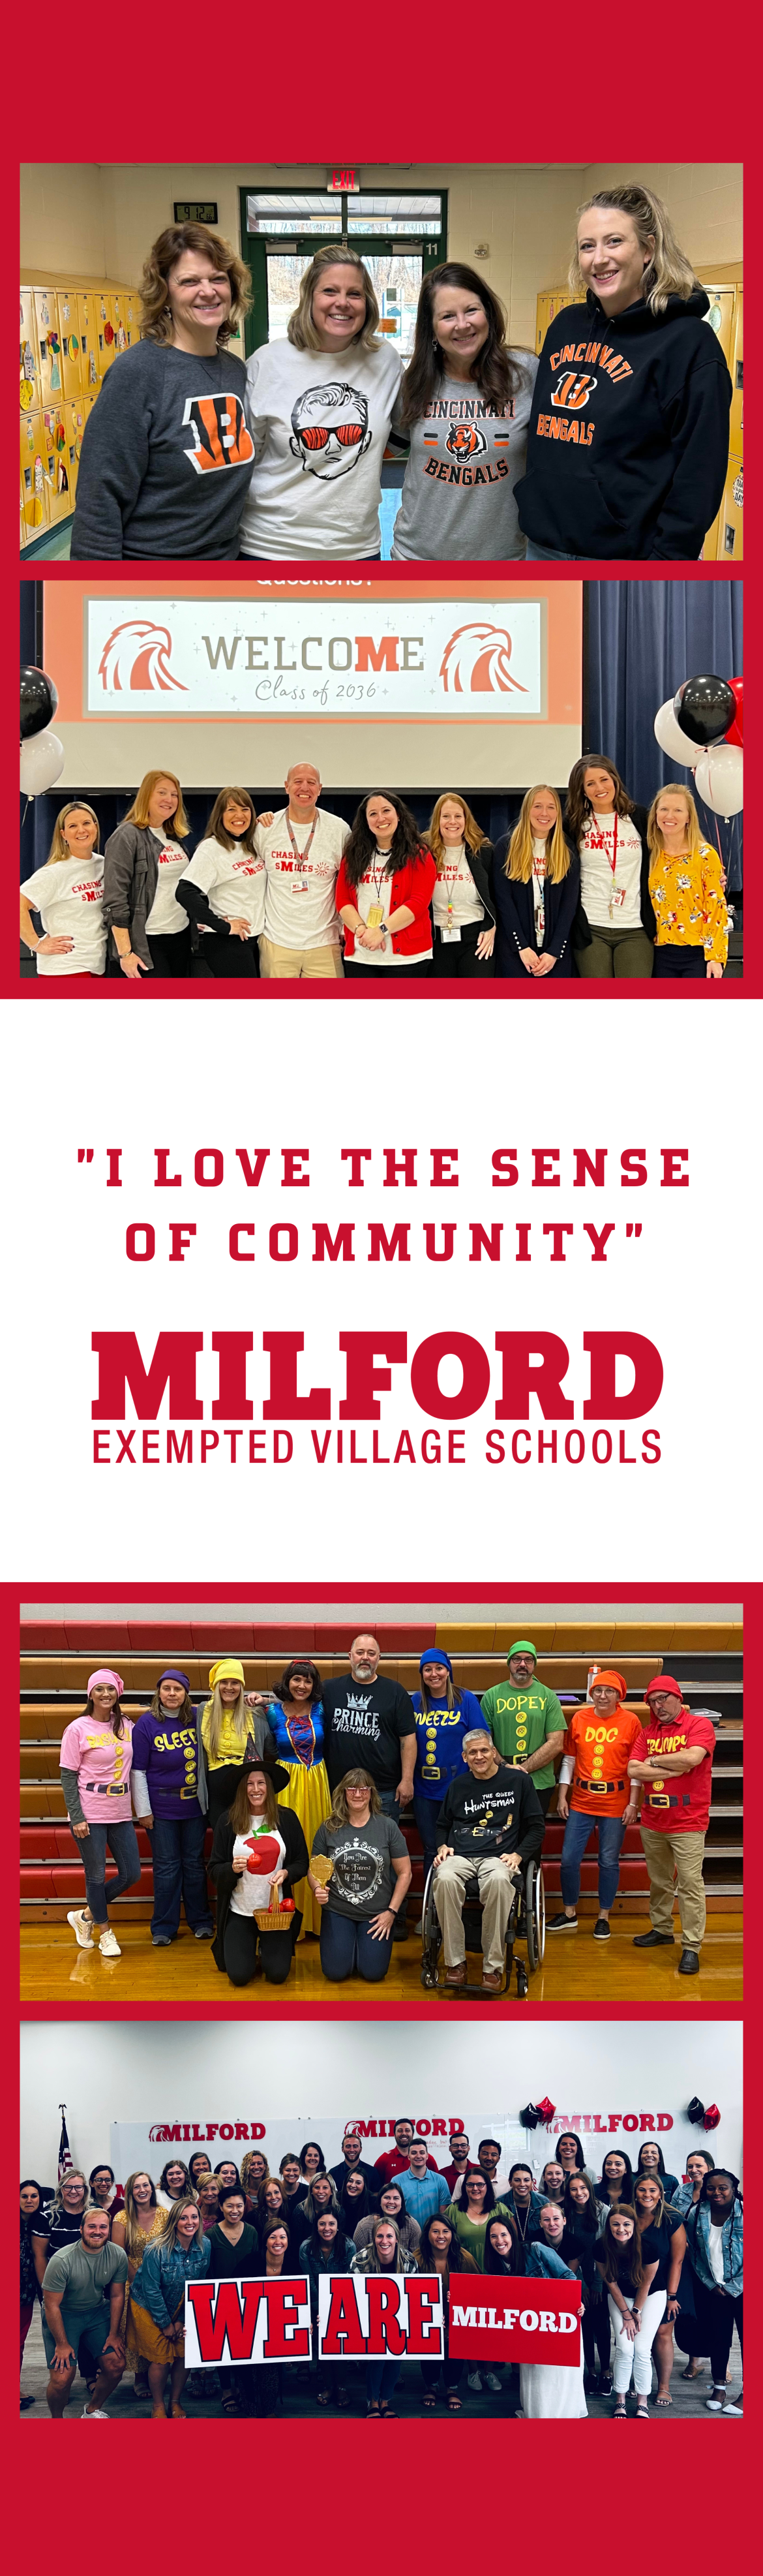 Collage of images of teachers in banner with "I Love the Sense of Community"